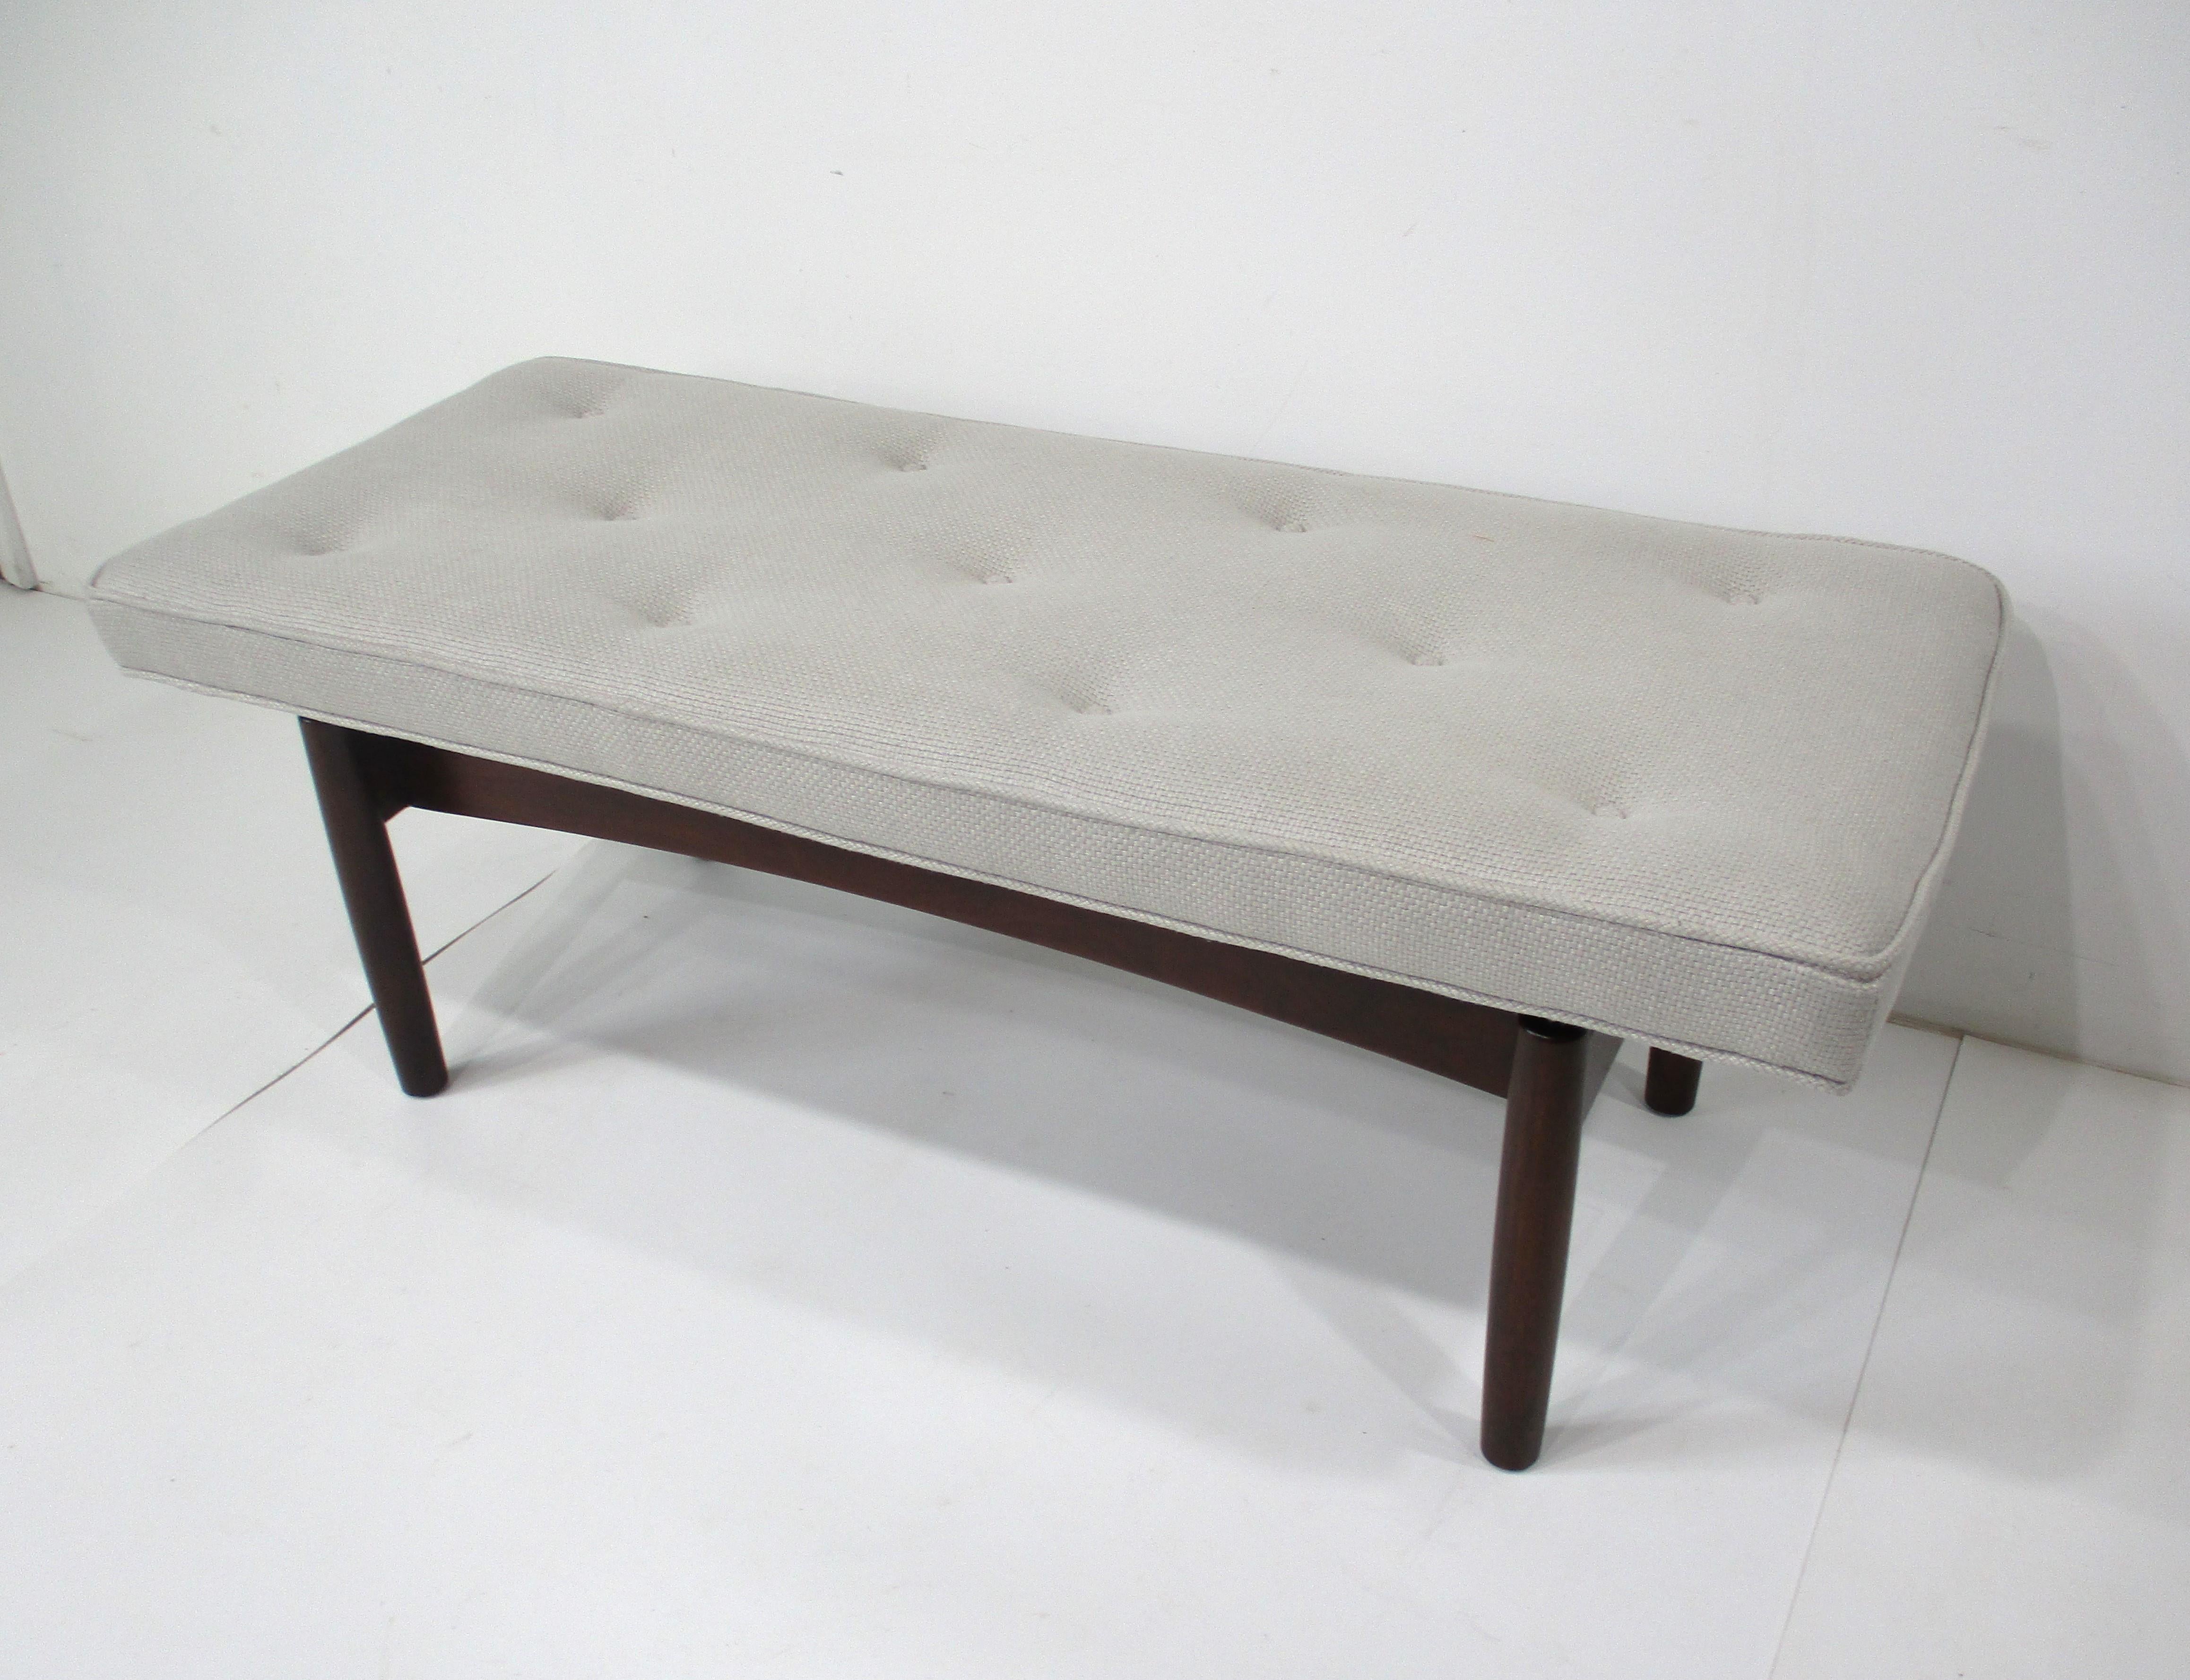 Upholstery Upholstered Walnut Bench in the Style of Greta Grossman Danish Modern (A) For Sale